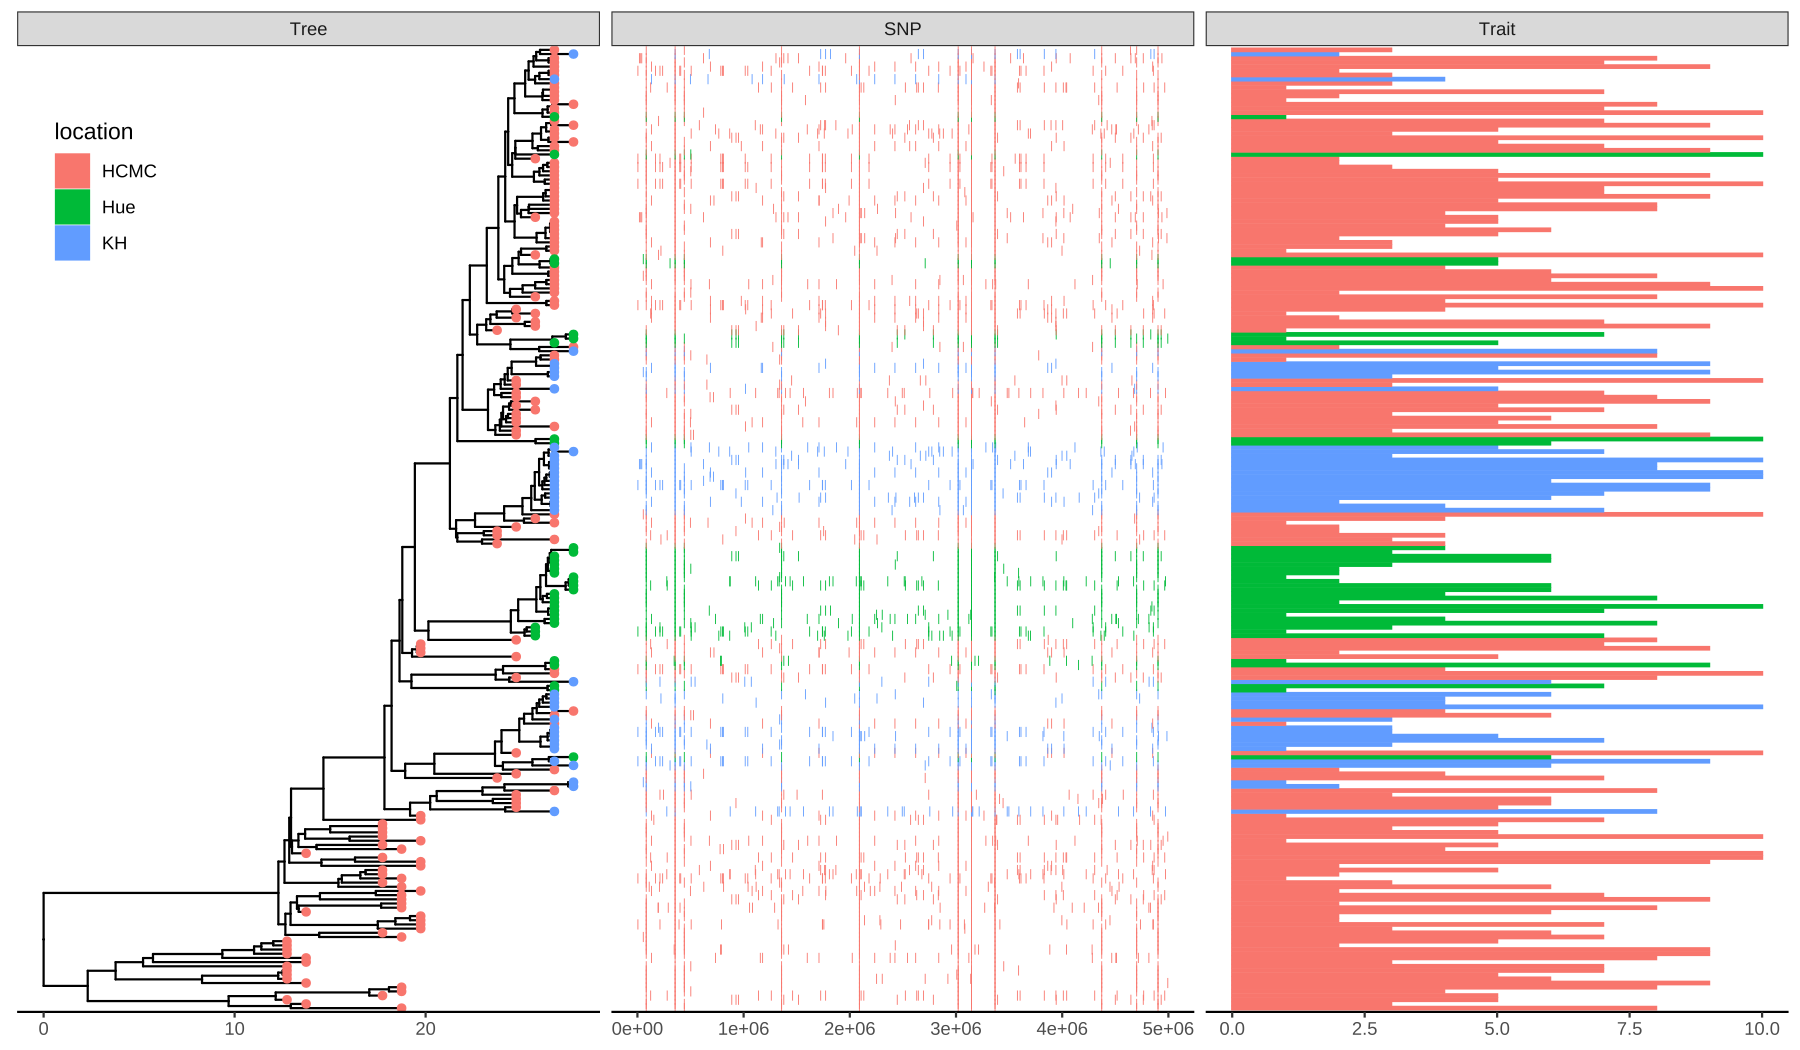 Example of plotting SNP and trait data. The ‘location’ information was attached to the tree and used to color tip symbols (Tree panel), and other datasets. SNP and Trait data were visualized as dot chart (SNP panel) and bar chart (Trait panel).